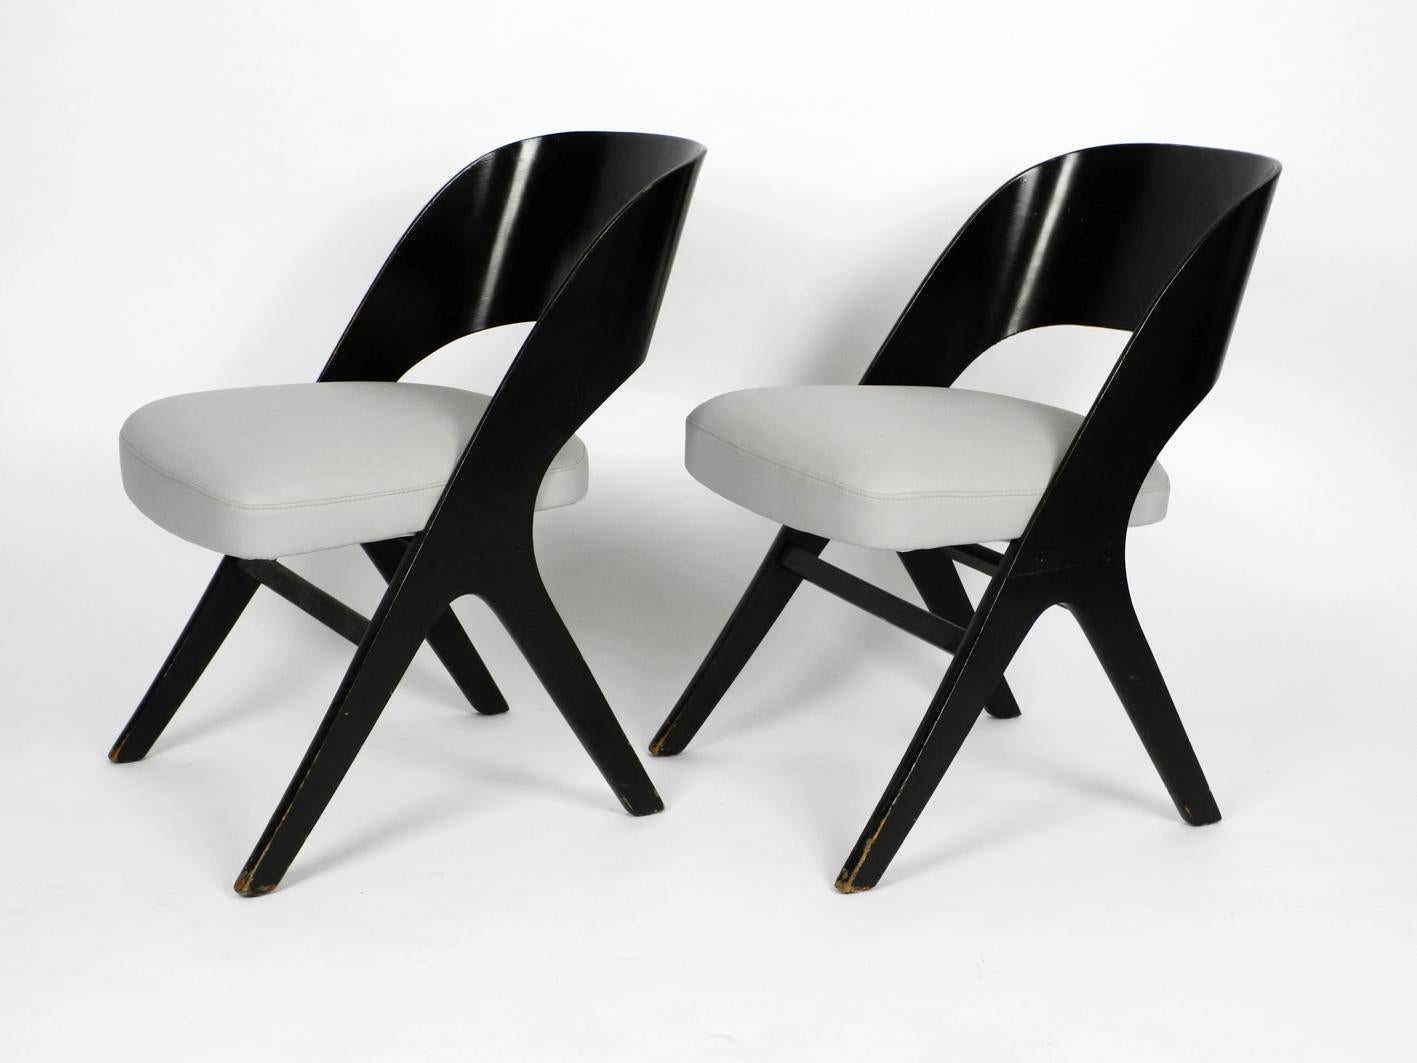 Pair of very rare and beautiful original Mid-Century Modern black and grey chairs by Carl Sasse for Casala reupholstered.
X legs made of black lacquered wood. Curved backrest made of plywood.
Very high quality and great minimalistic 1950s design